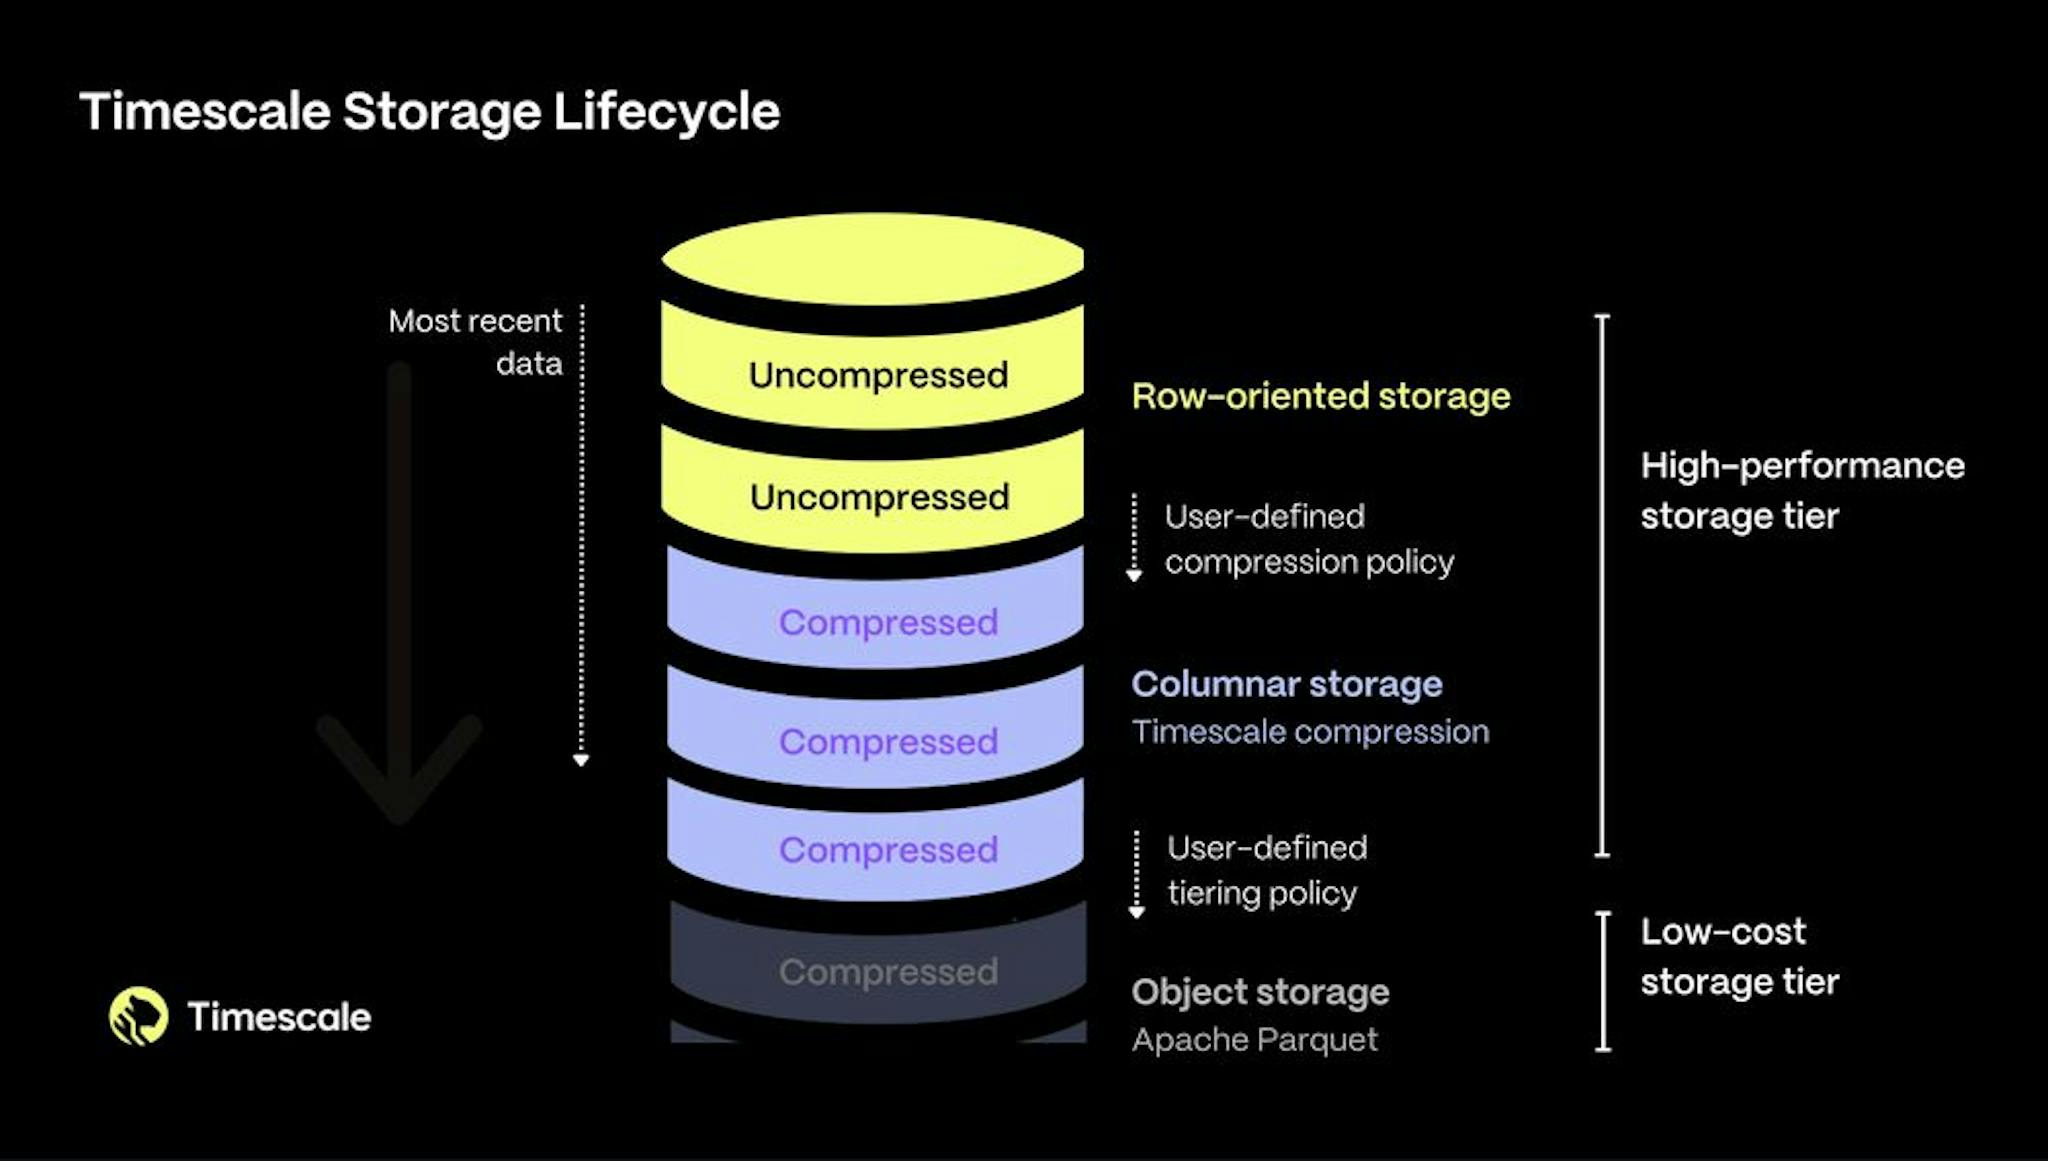 You can take advantage of both compression and the low-cost storage tier when scaling your databases in the Timescale platform